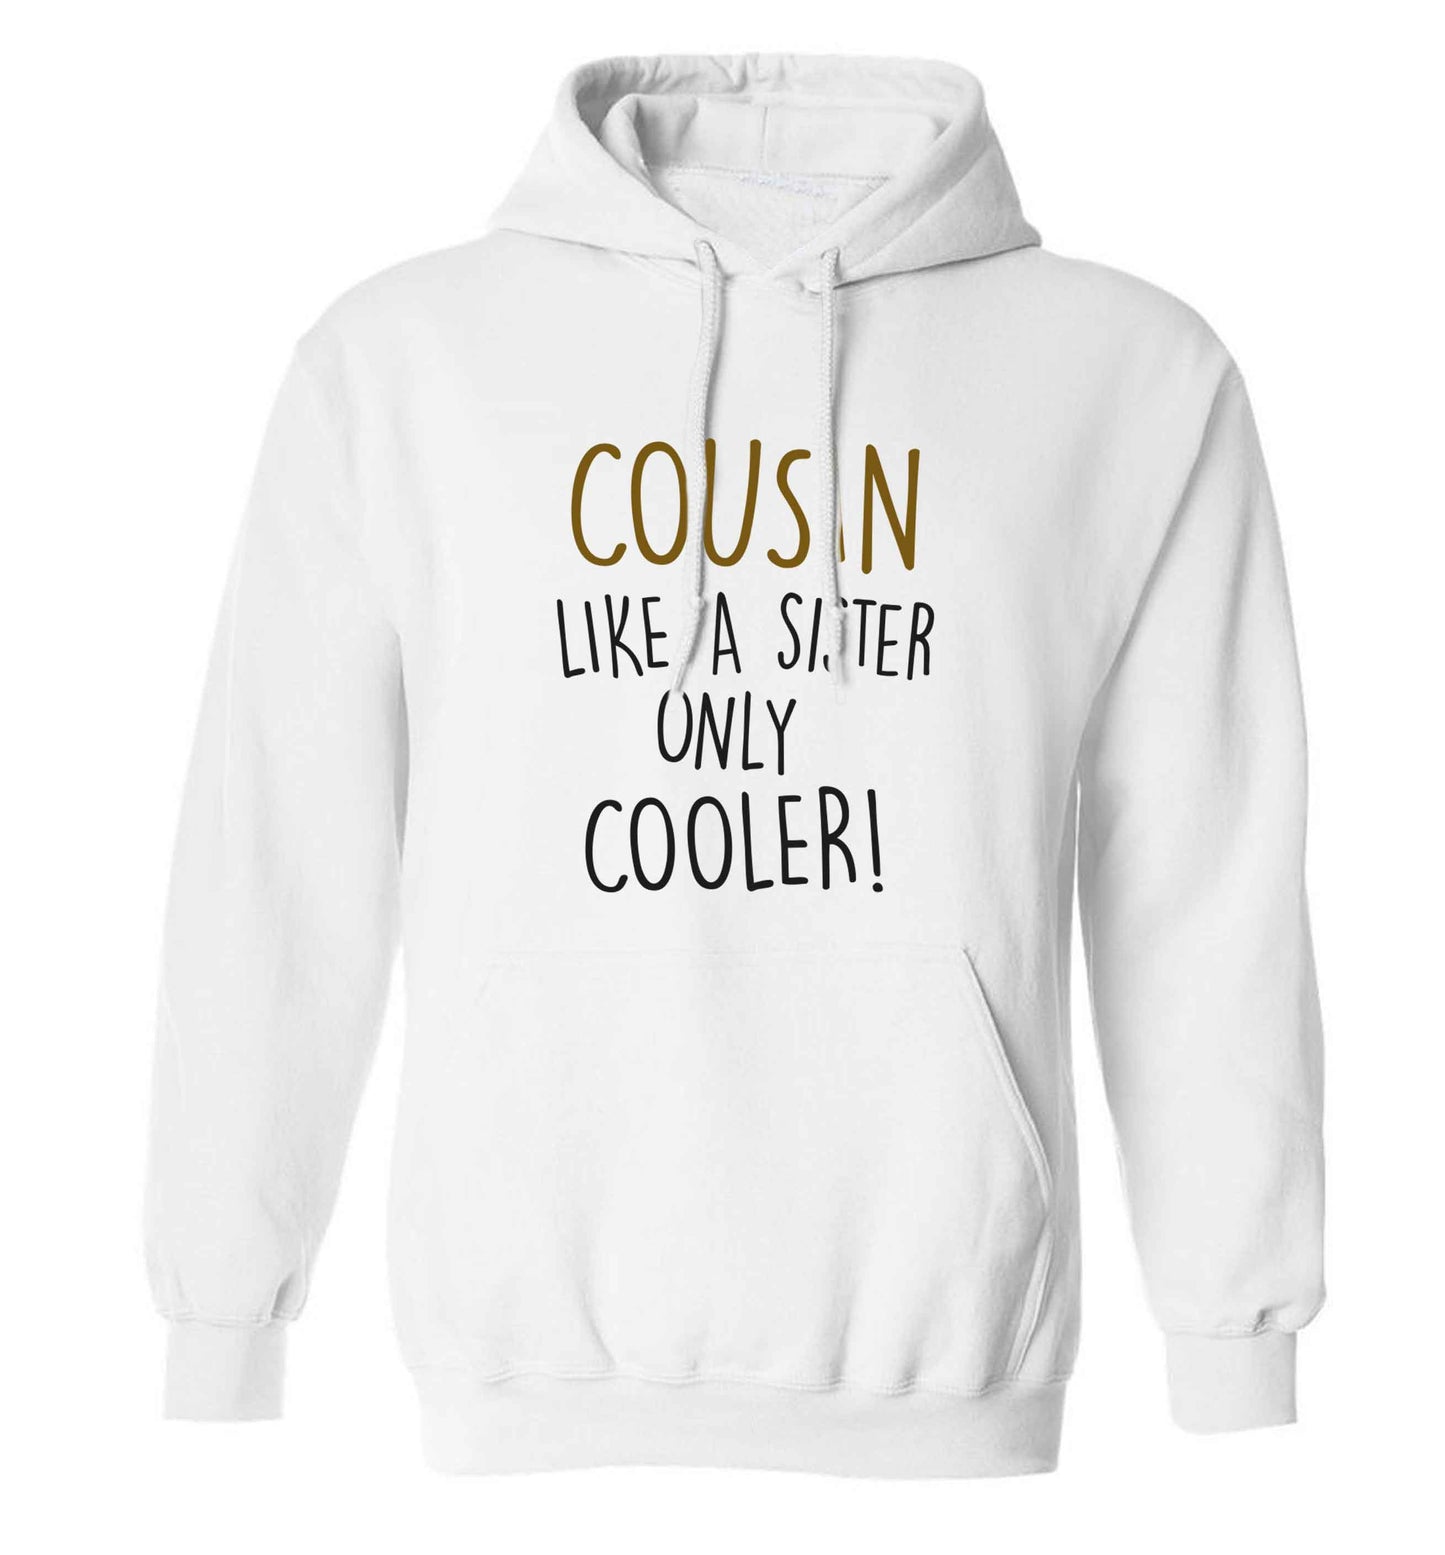 Cousin like a sister only cooler adults unisex white hoodie 2XL